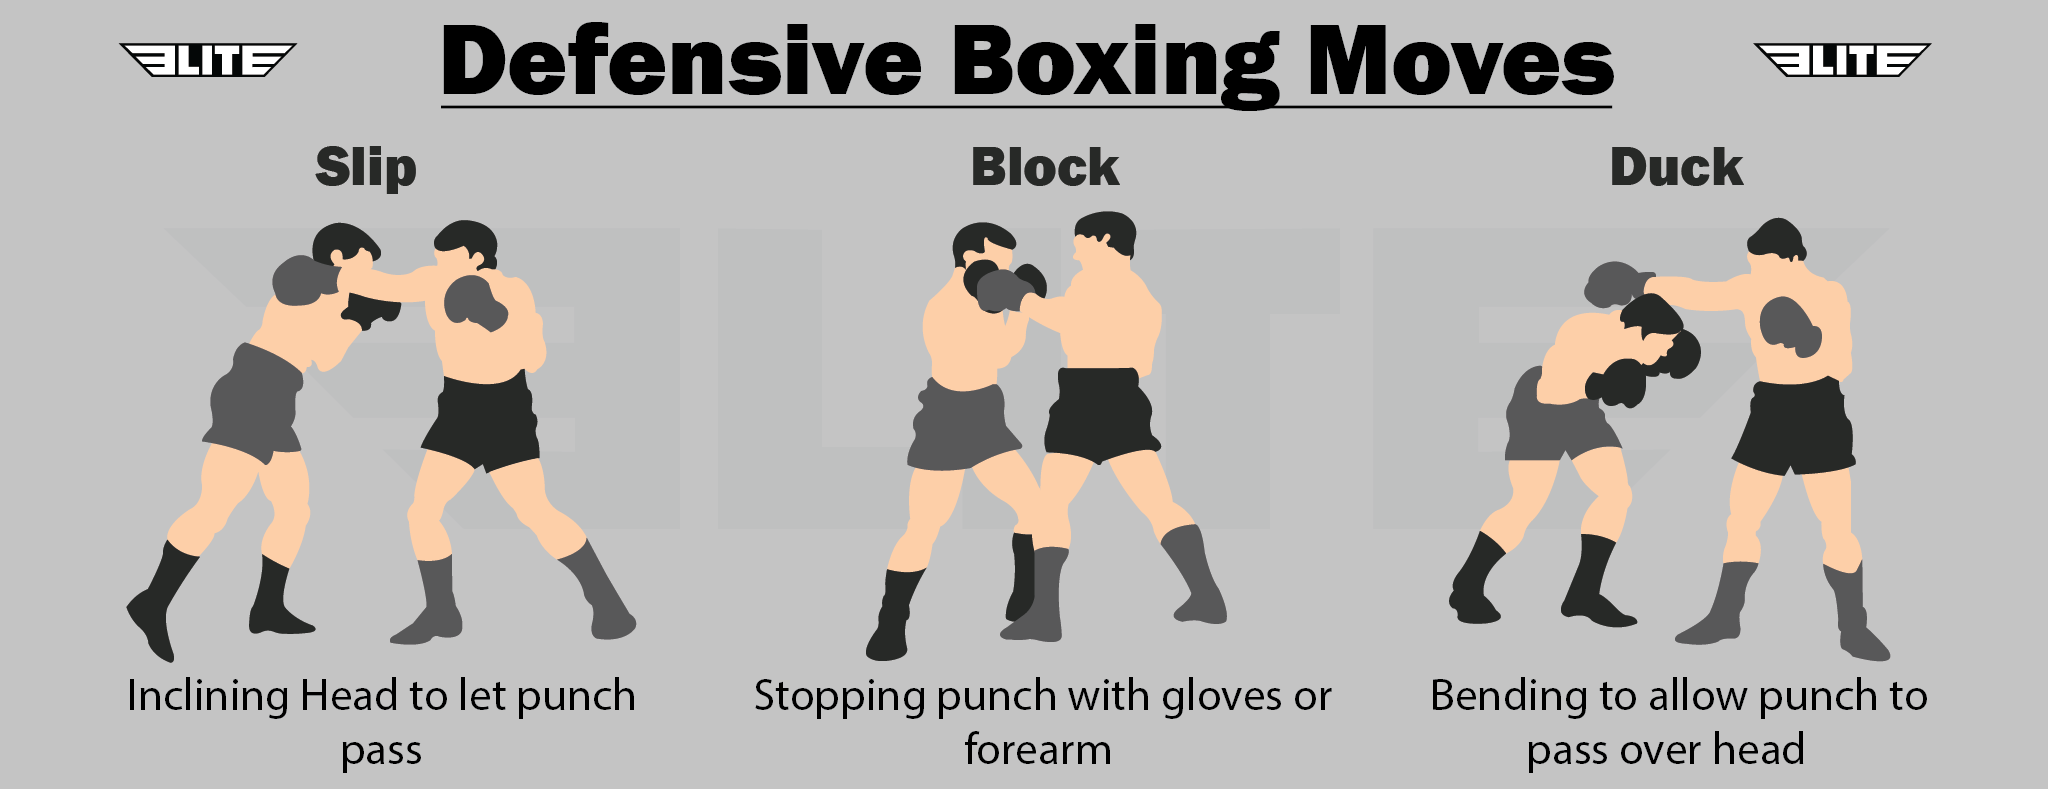 8 Benefits of Boxing with Weights: A Must-Read Guide – Elite Sports